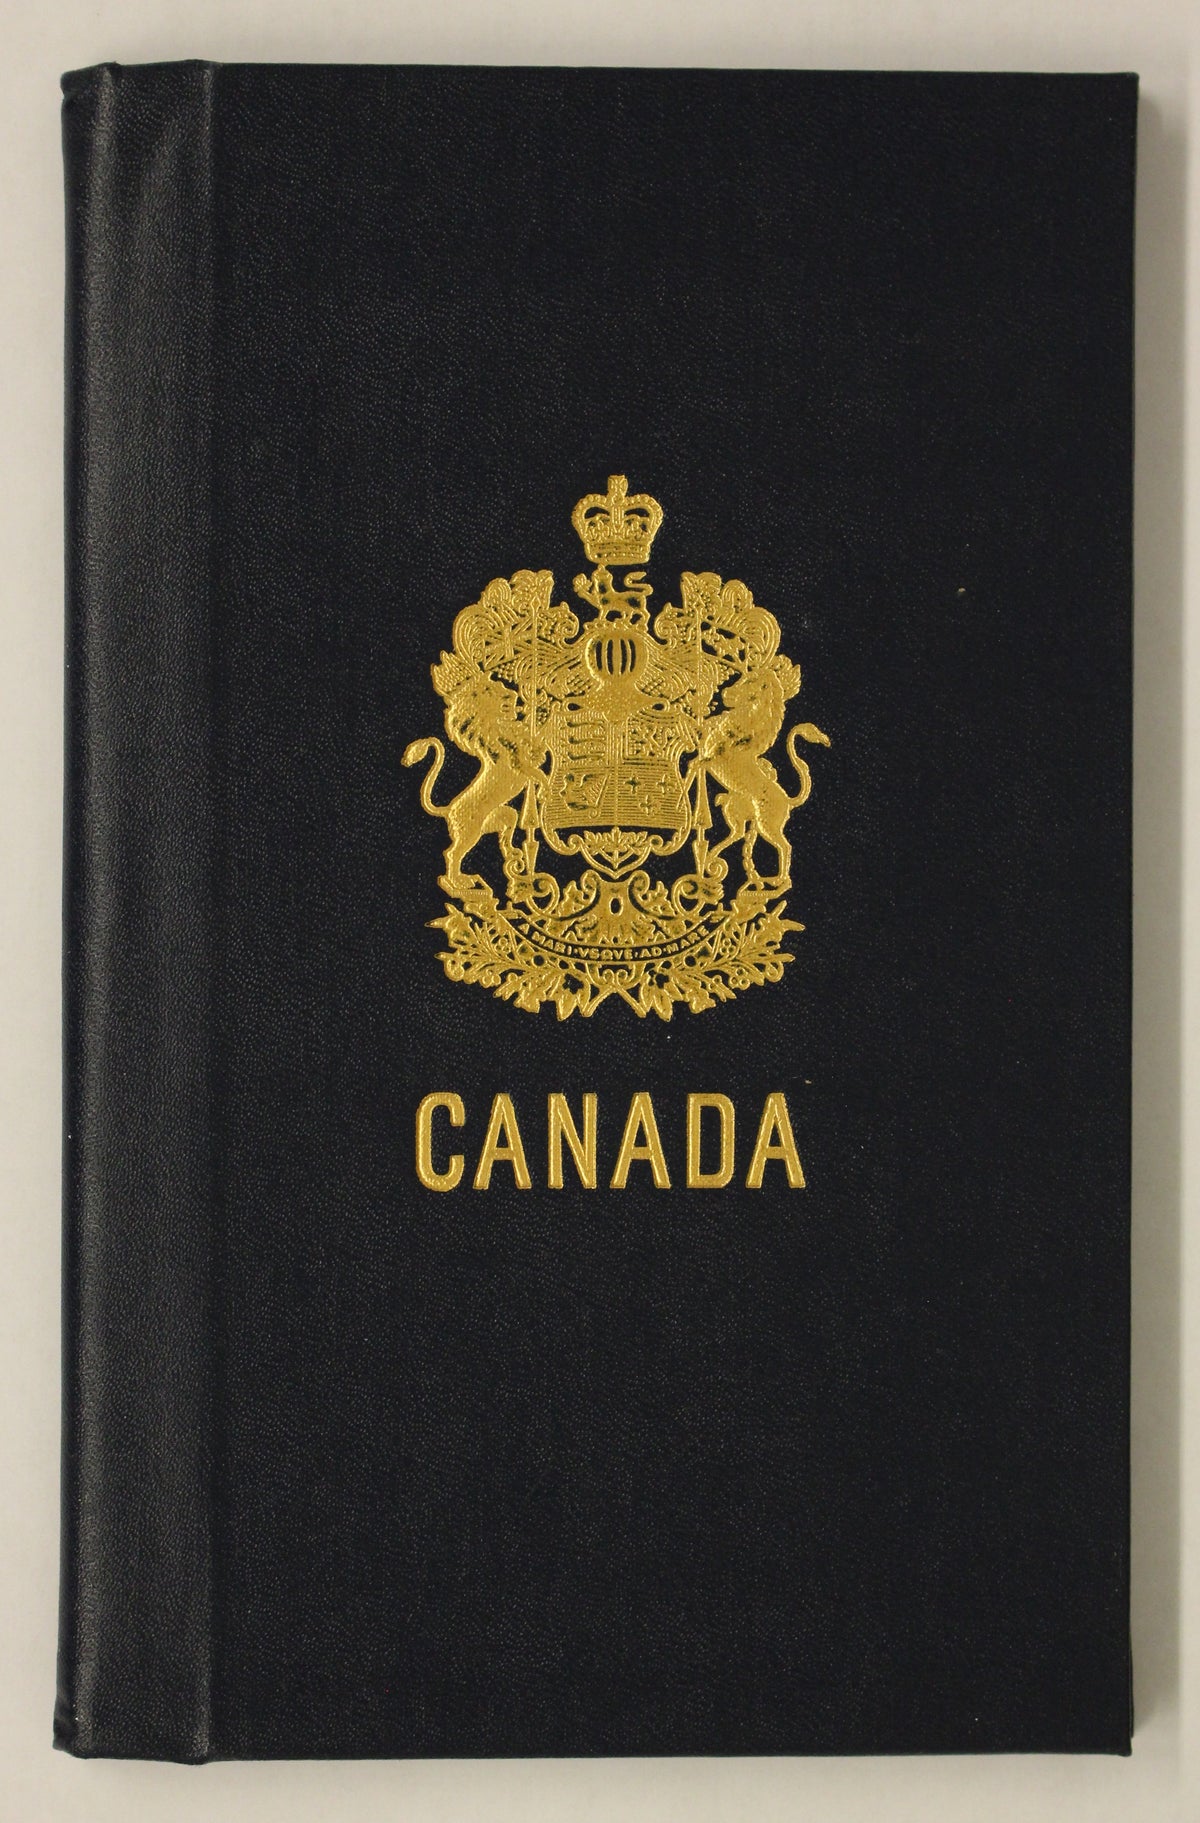 0359CA2307 - Canada, 1960 Foreign Post Office Presentation Booklet